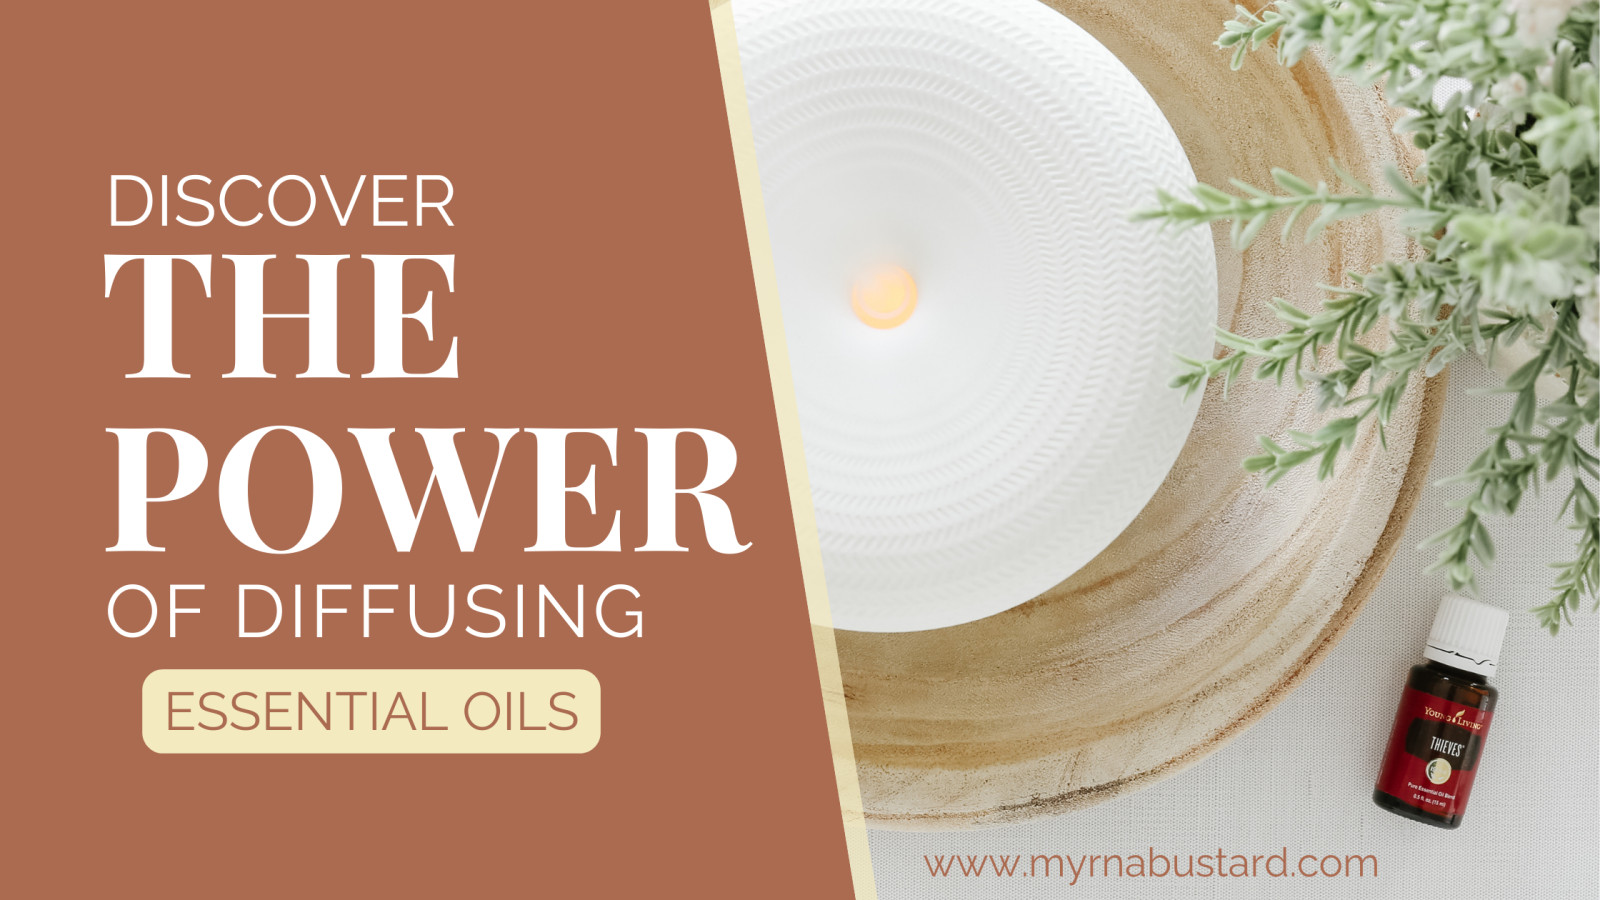 Discover the Power of Diffusing Essential Oils